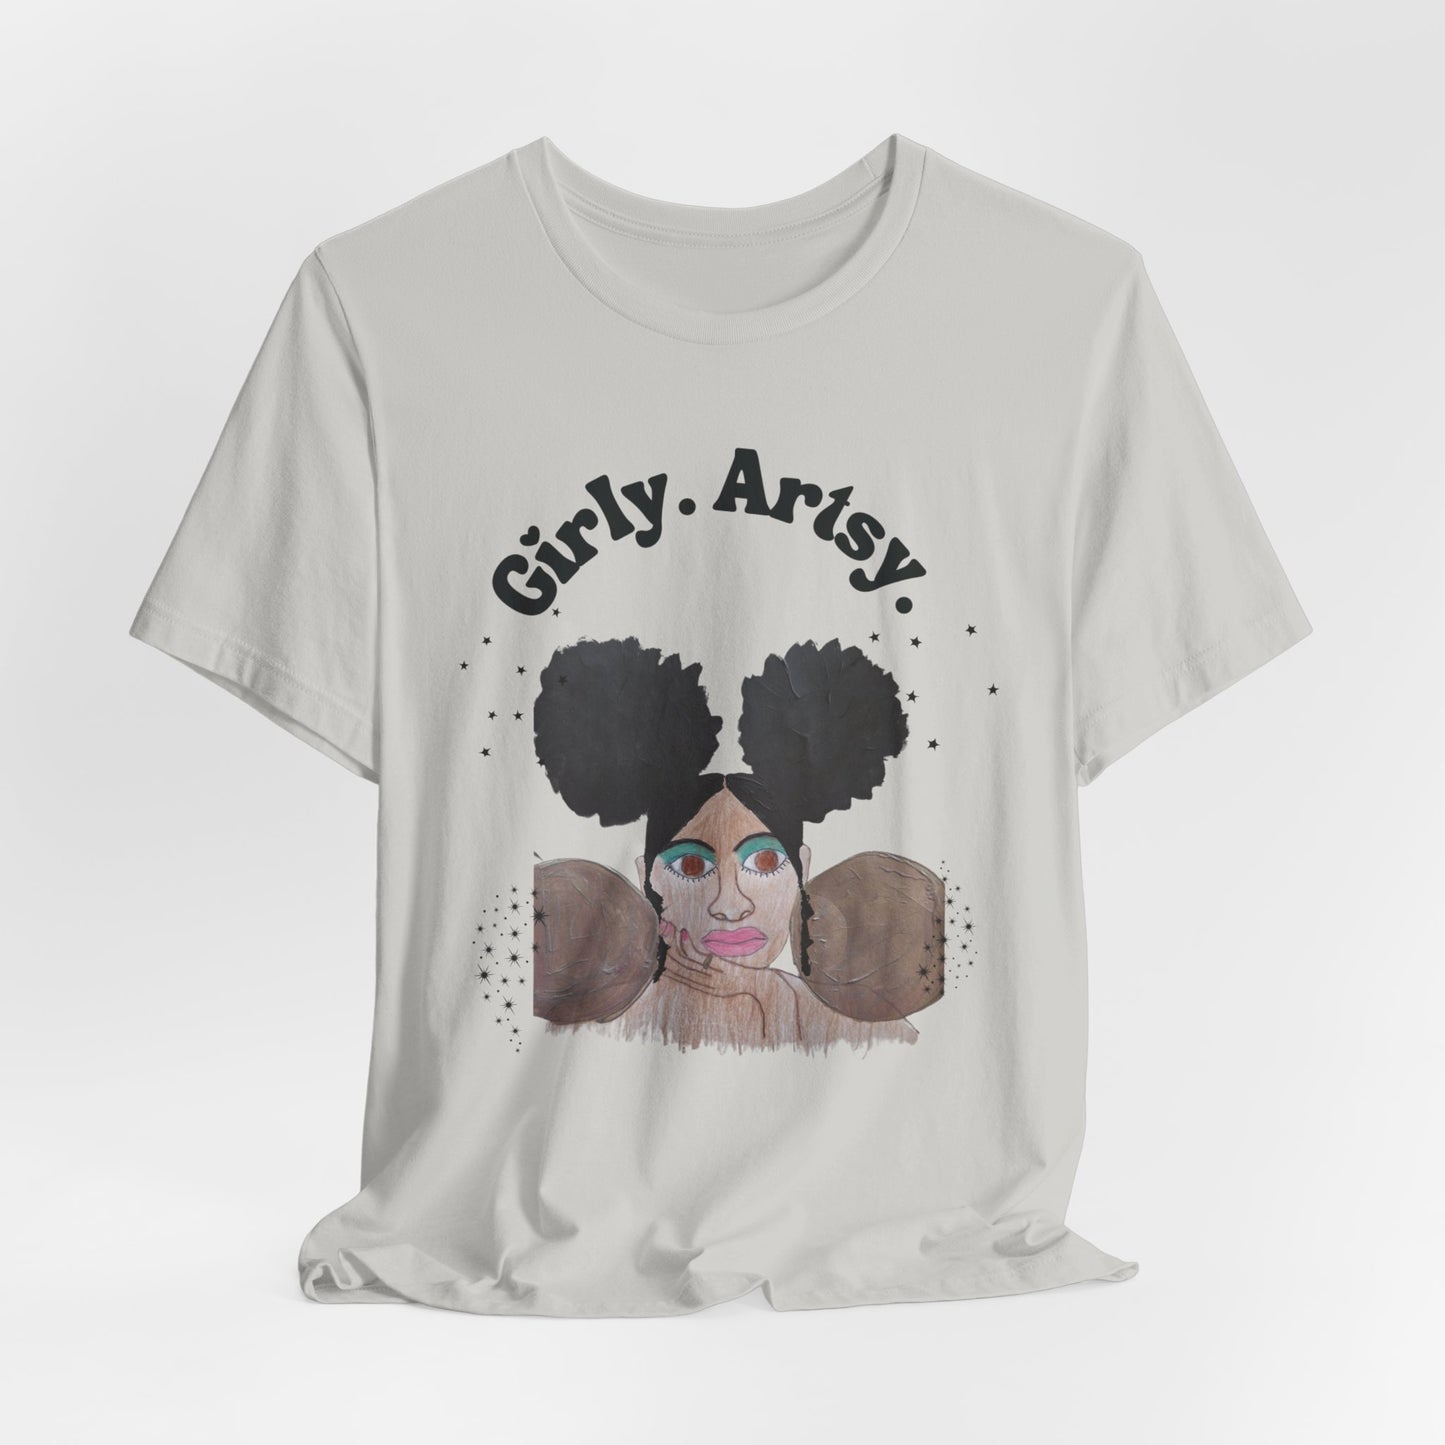 GIRLY. ARTSY. #2, Hand Painted Graphic T-shirt, Women's T-shirt, Black Art Graphic, Black Woman Graphic, Handpainted Graphic, Retro, Gift for Her, Urban Fashion, Urban Streetstyle, Unisex Jersey Short Sleeve Tee